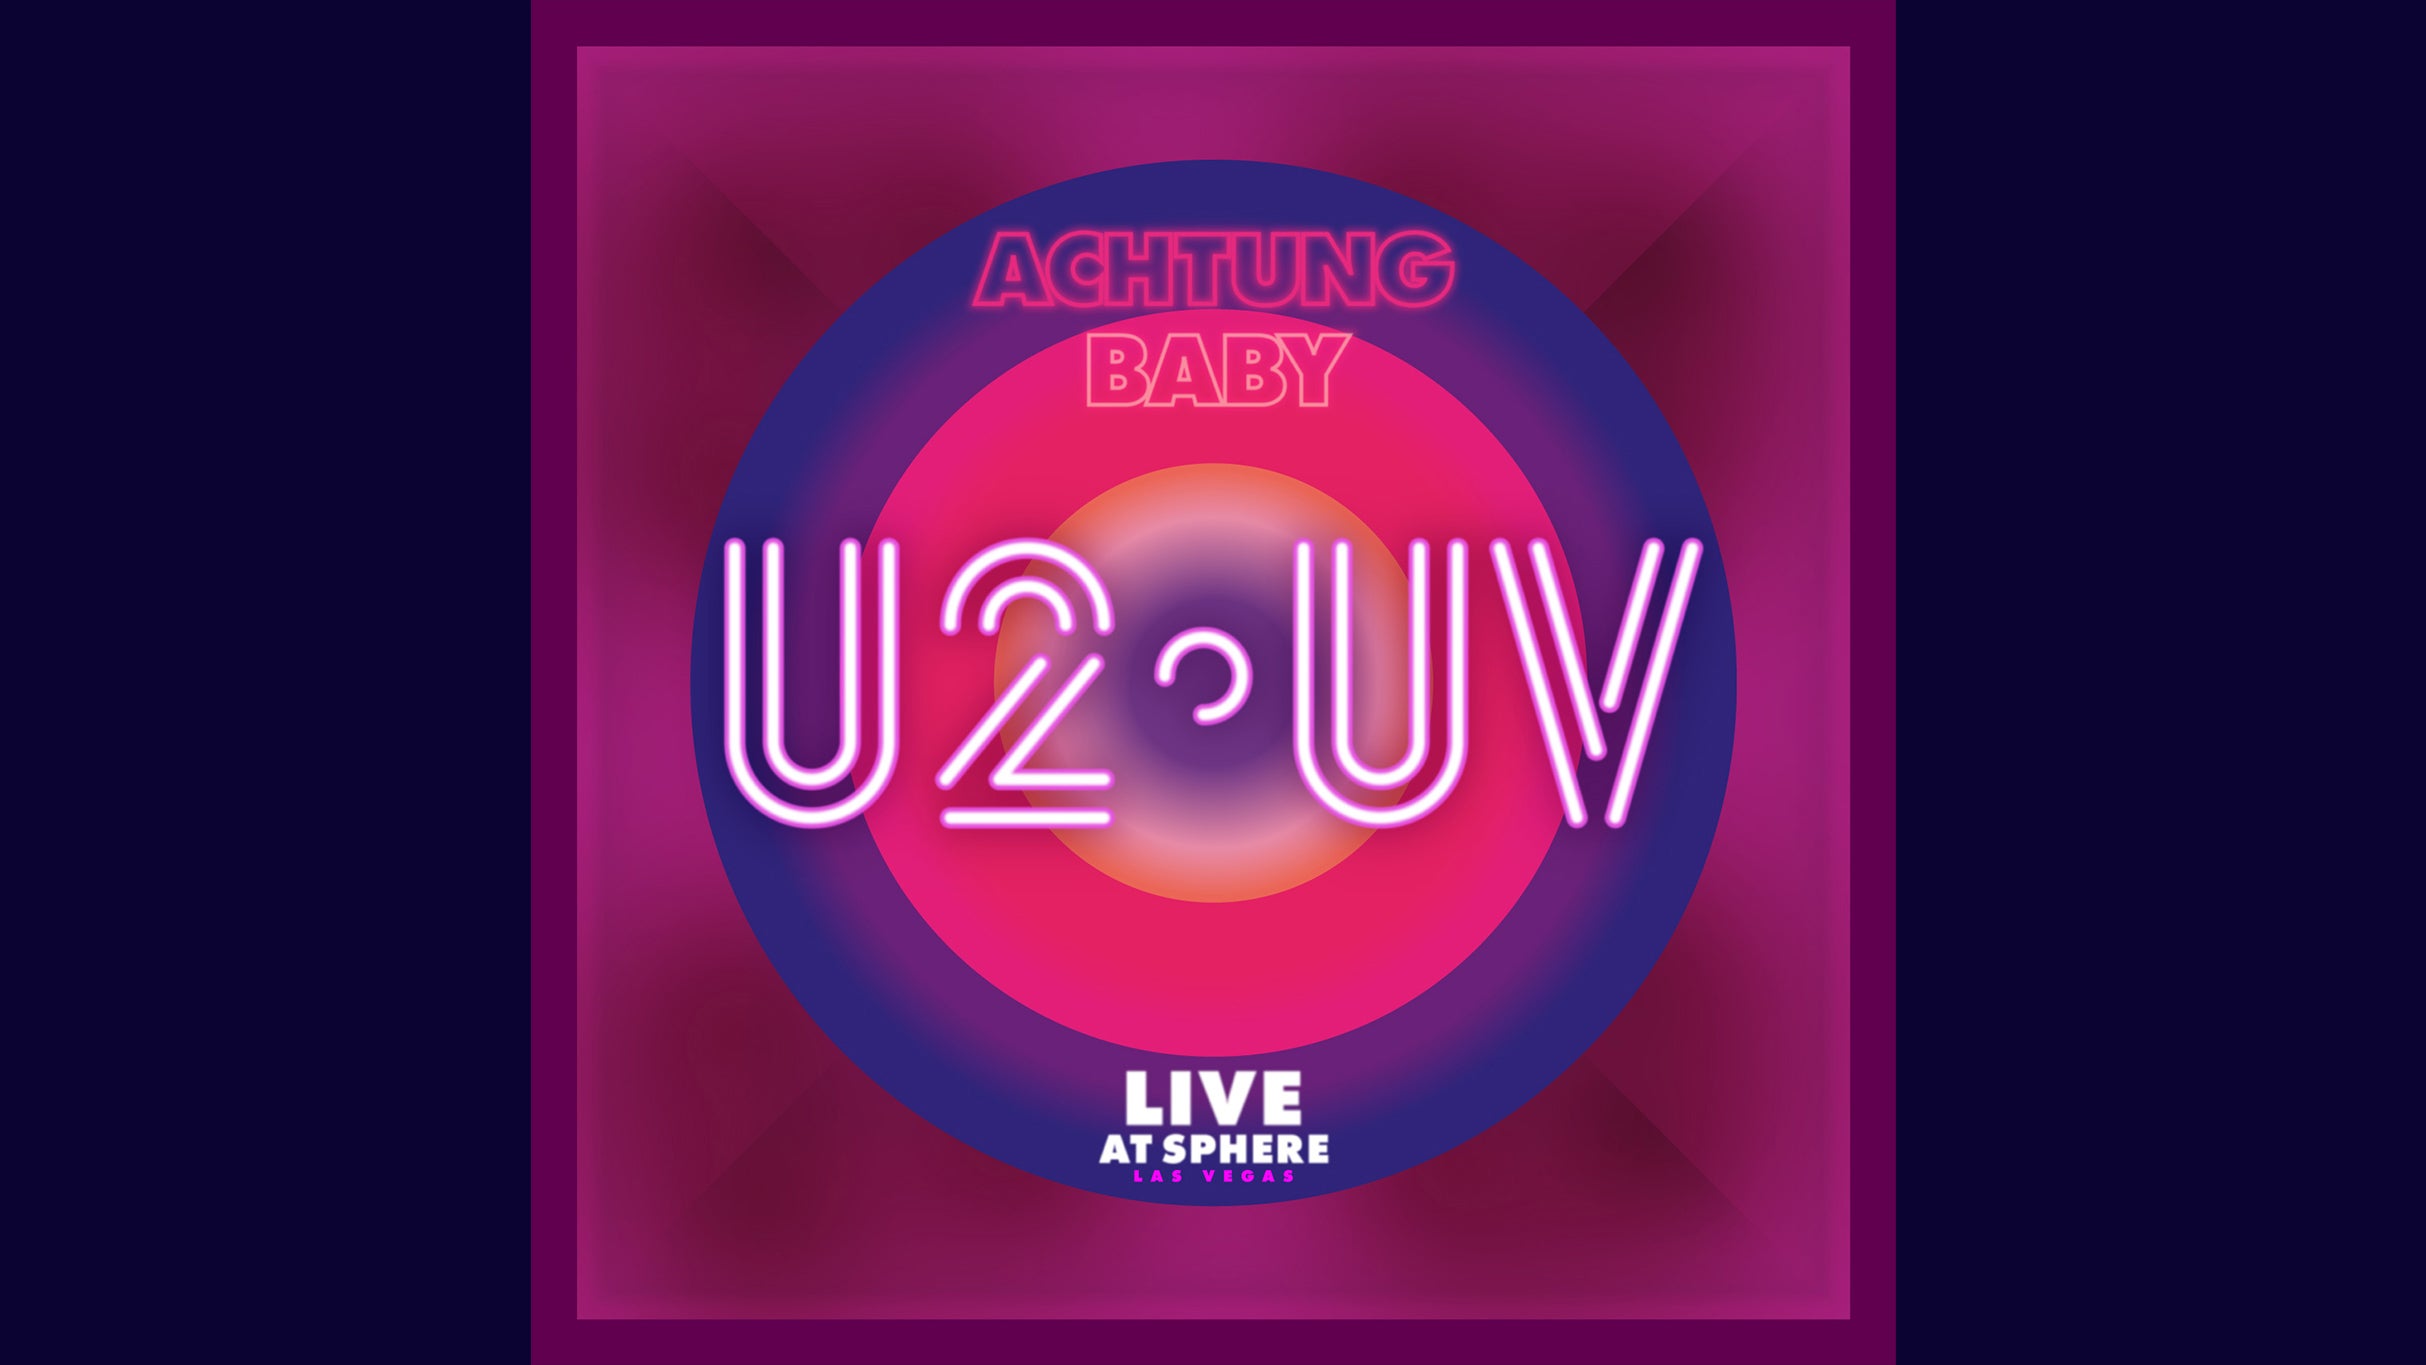 U2:UV Achtung Baby Live At Sphere - Reserved Seating in Las Vegas promo photo for Verified Fan presale offer code